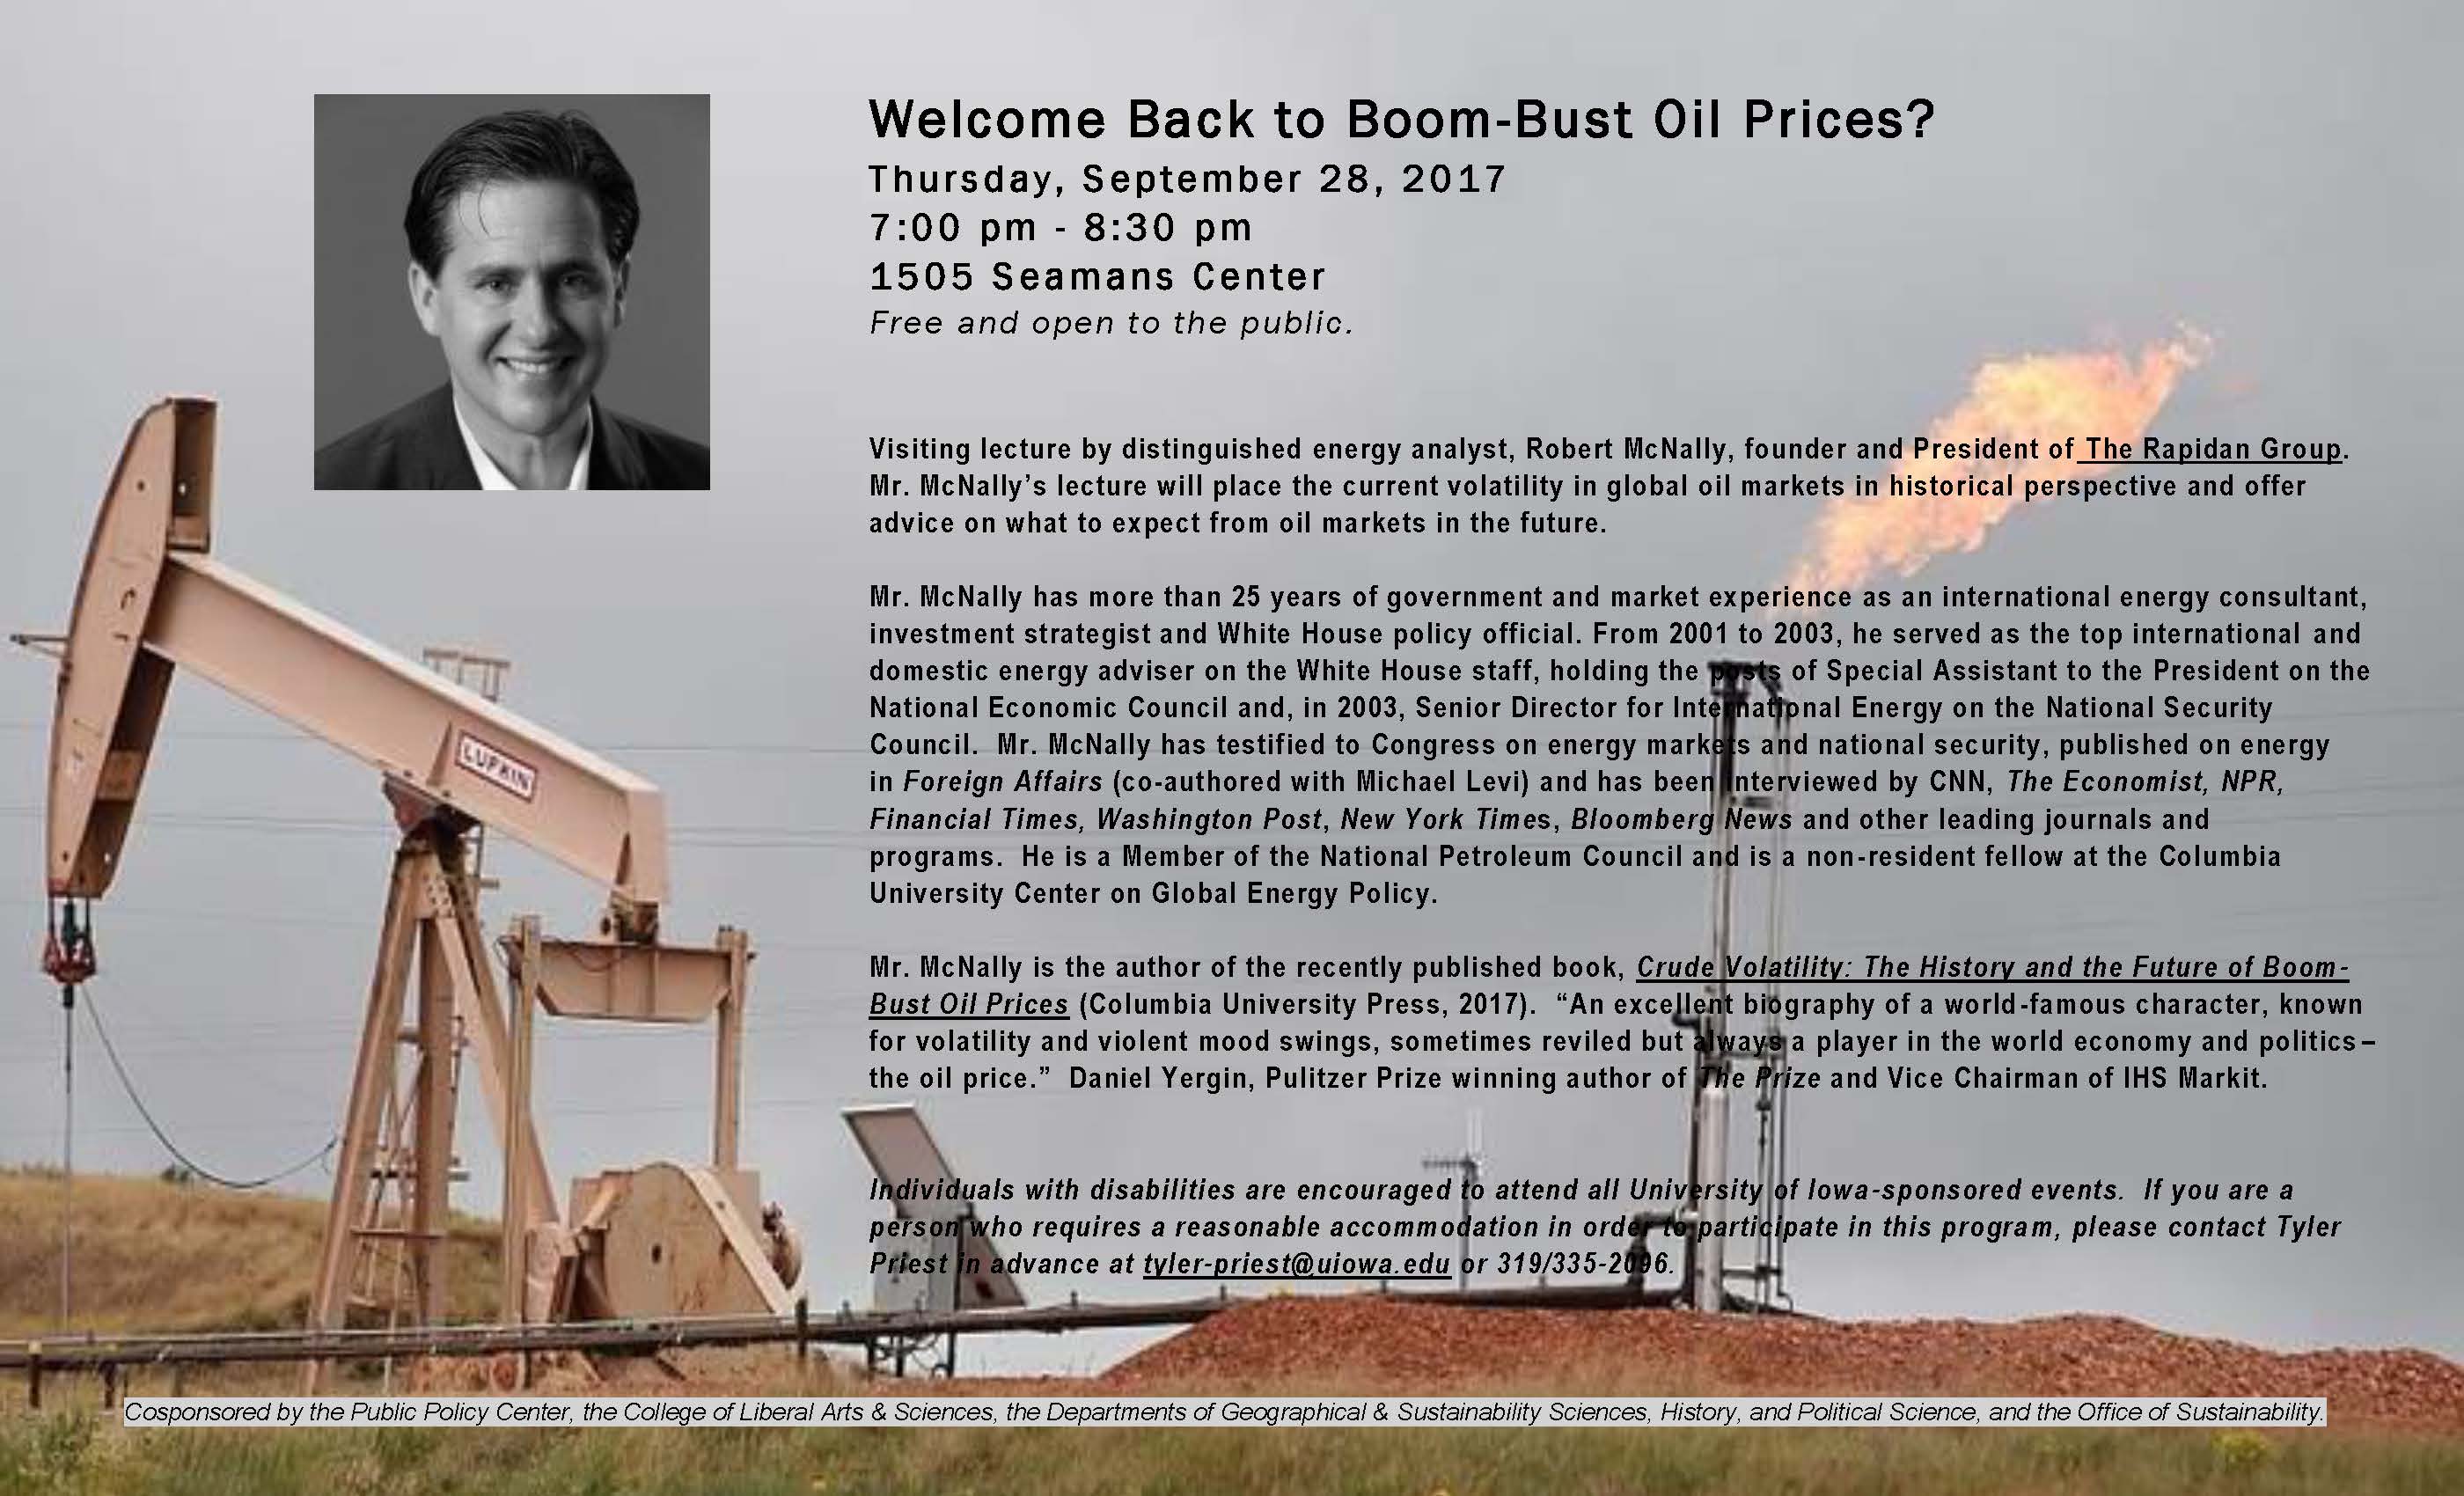 WELCOME BACK OIL PIC